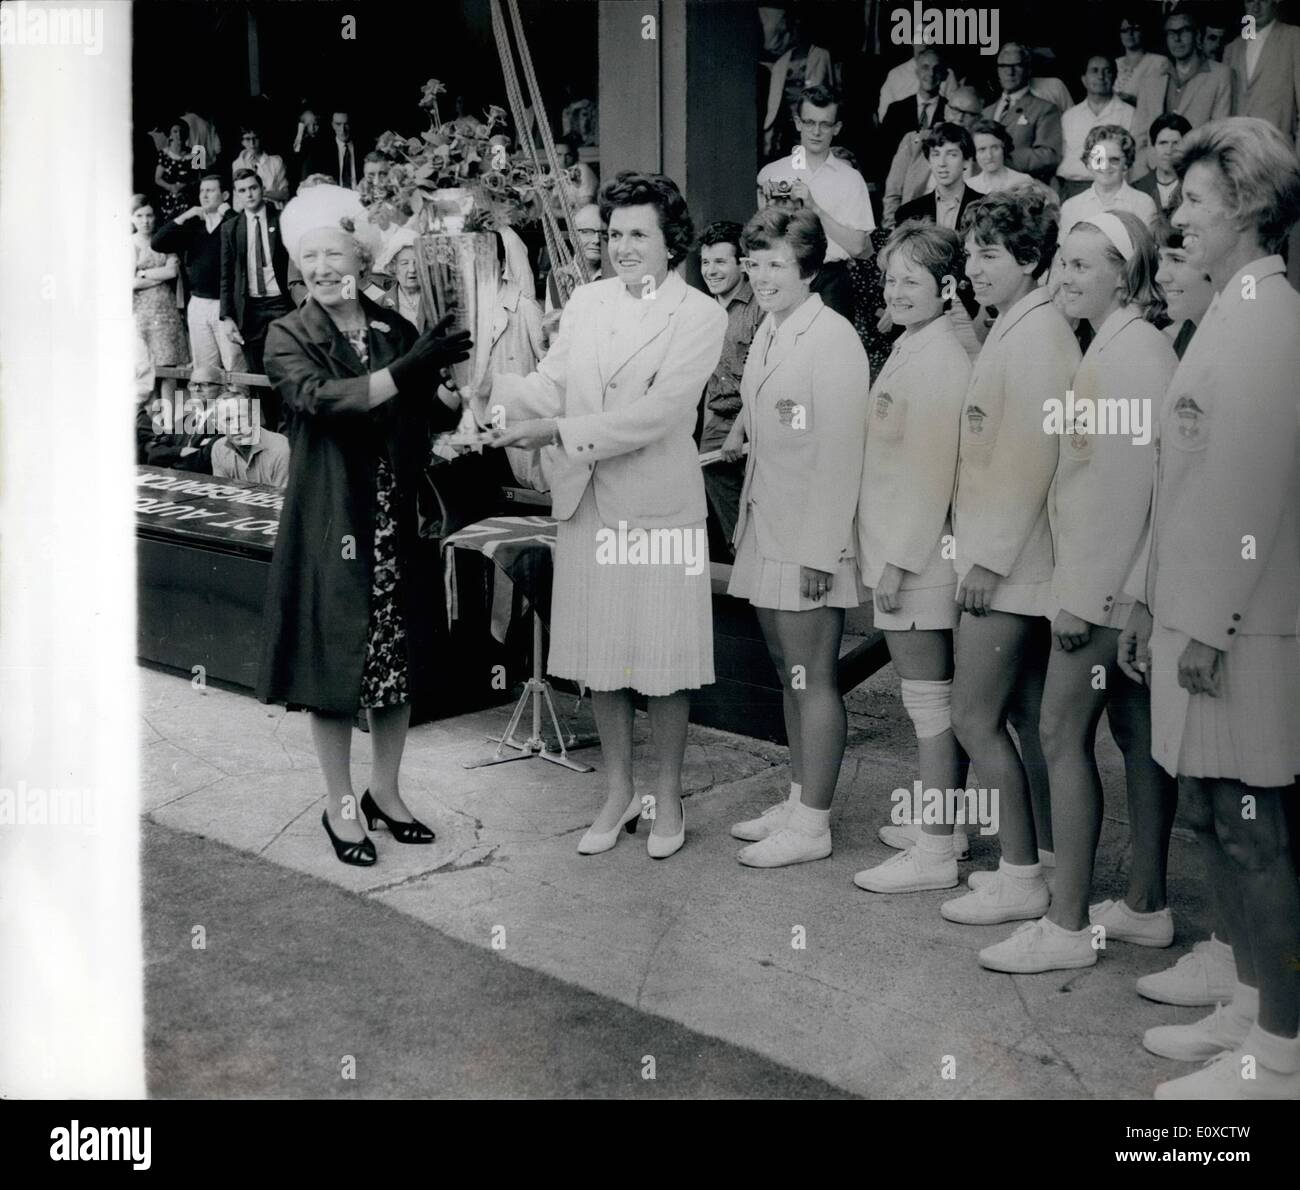 Jun. 06, 1966 - Wightman Cup At Wimbledon America Win 4-3: Photo Shows Lt. R. Mrs. Harrison wife of the Chairman of L.T.A. presents the Wightman Trophy to Miss Margaret Varner, to non playing Cpt of the winning U.S. team looking on.after beating G.B. by 4-3 at Wimbledon today. Stock Photo